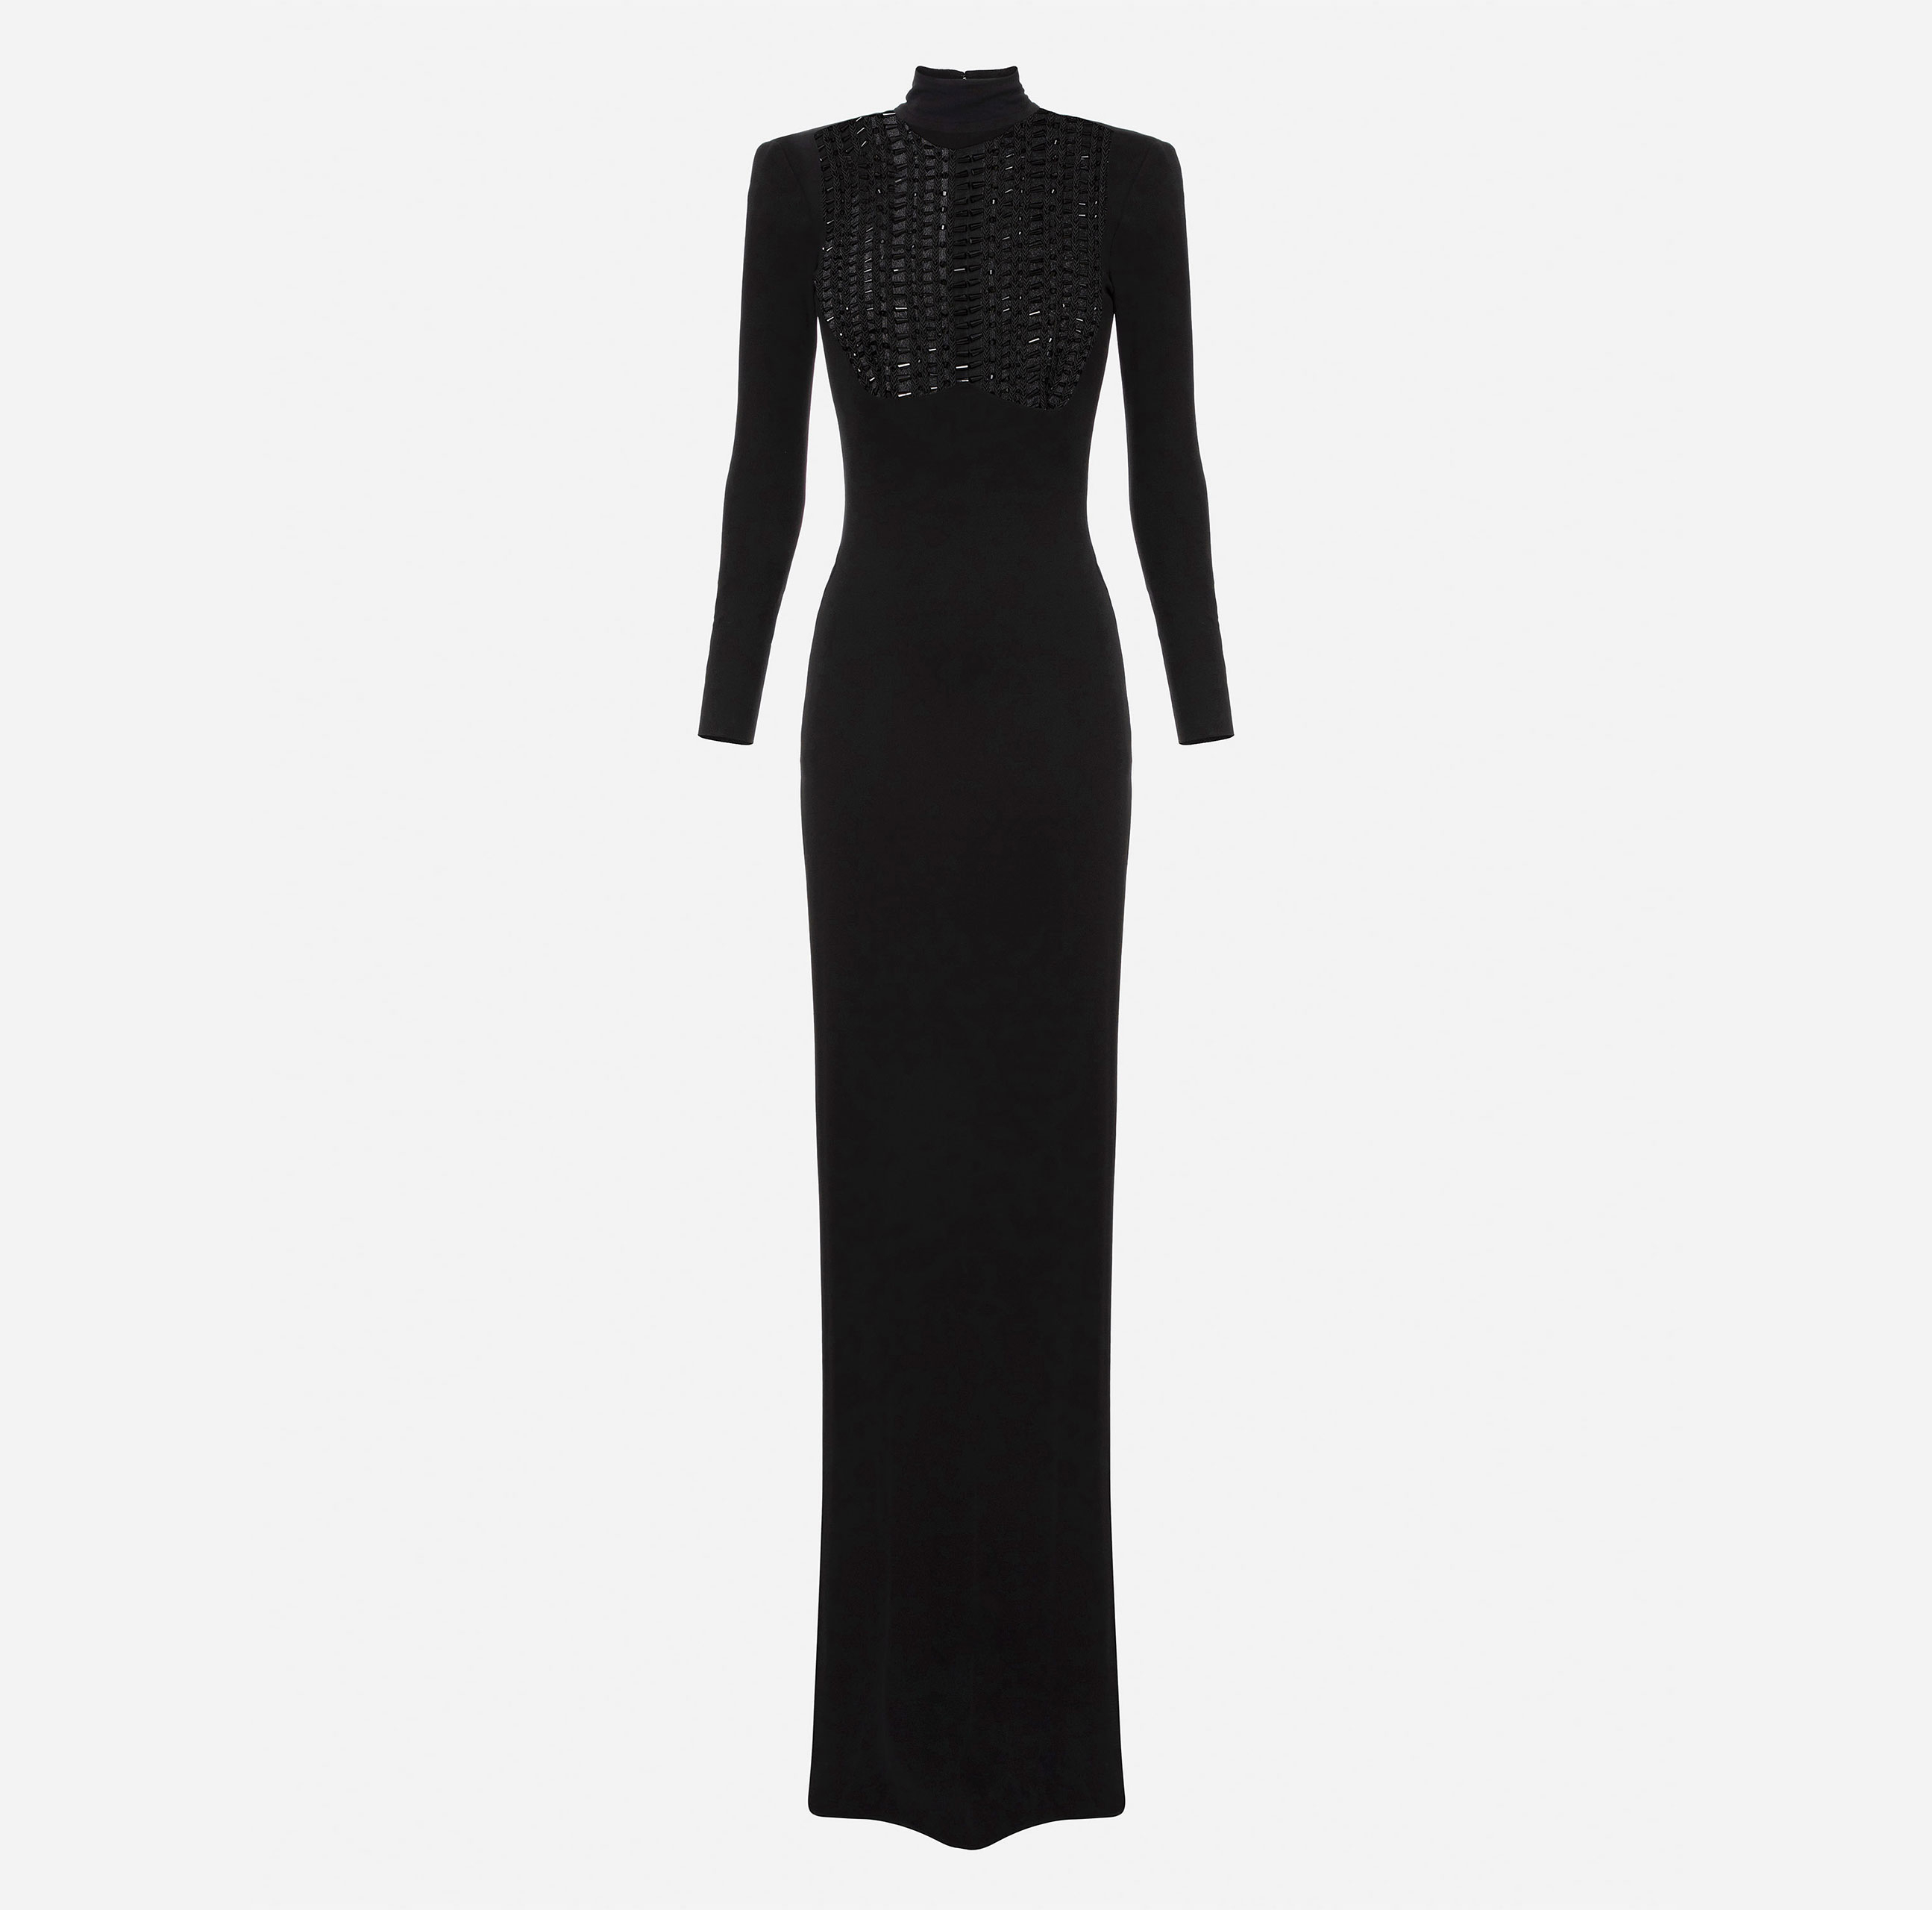 Red carpet dress in jerseywith embroidered ascot tie - Elisabetta Franchi